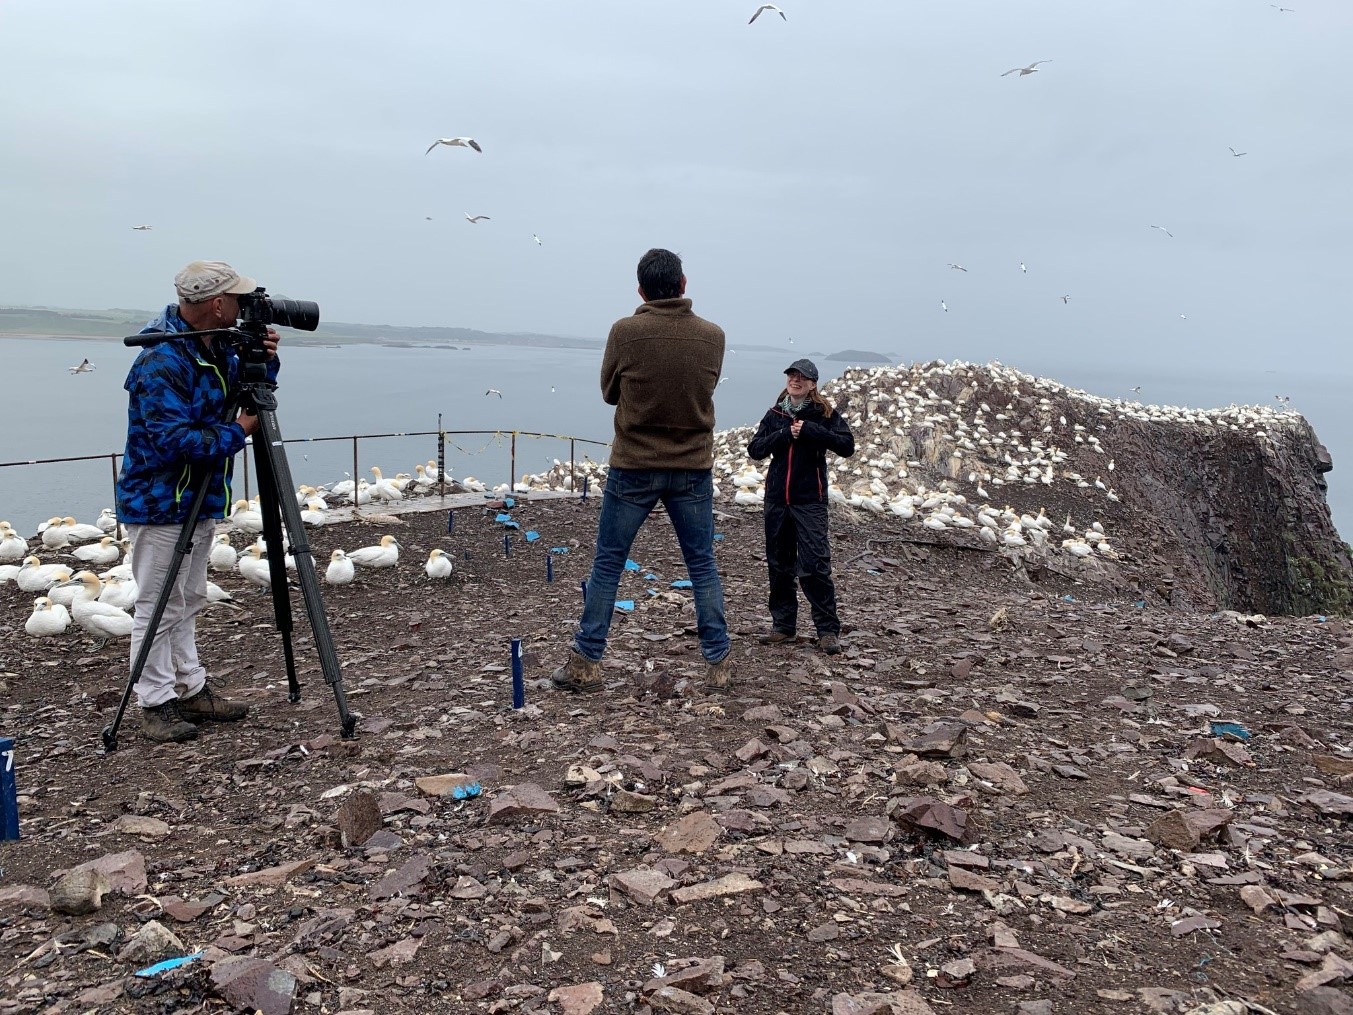 Amy Tyndall is getting set up for her BBC interview on Bass Rock. A journalist with a tripod is pointing a camera at her. Hundreds of gannets can be seen sitting in the background.